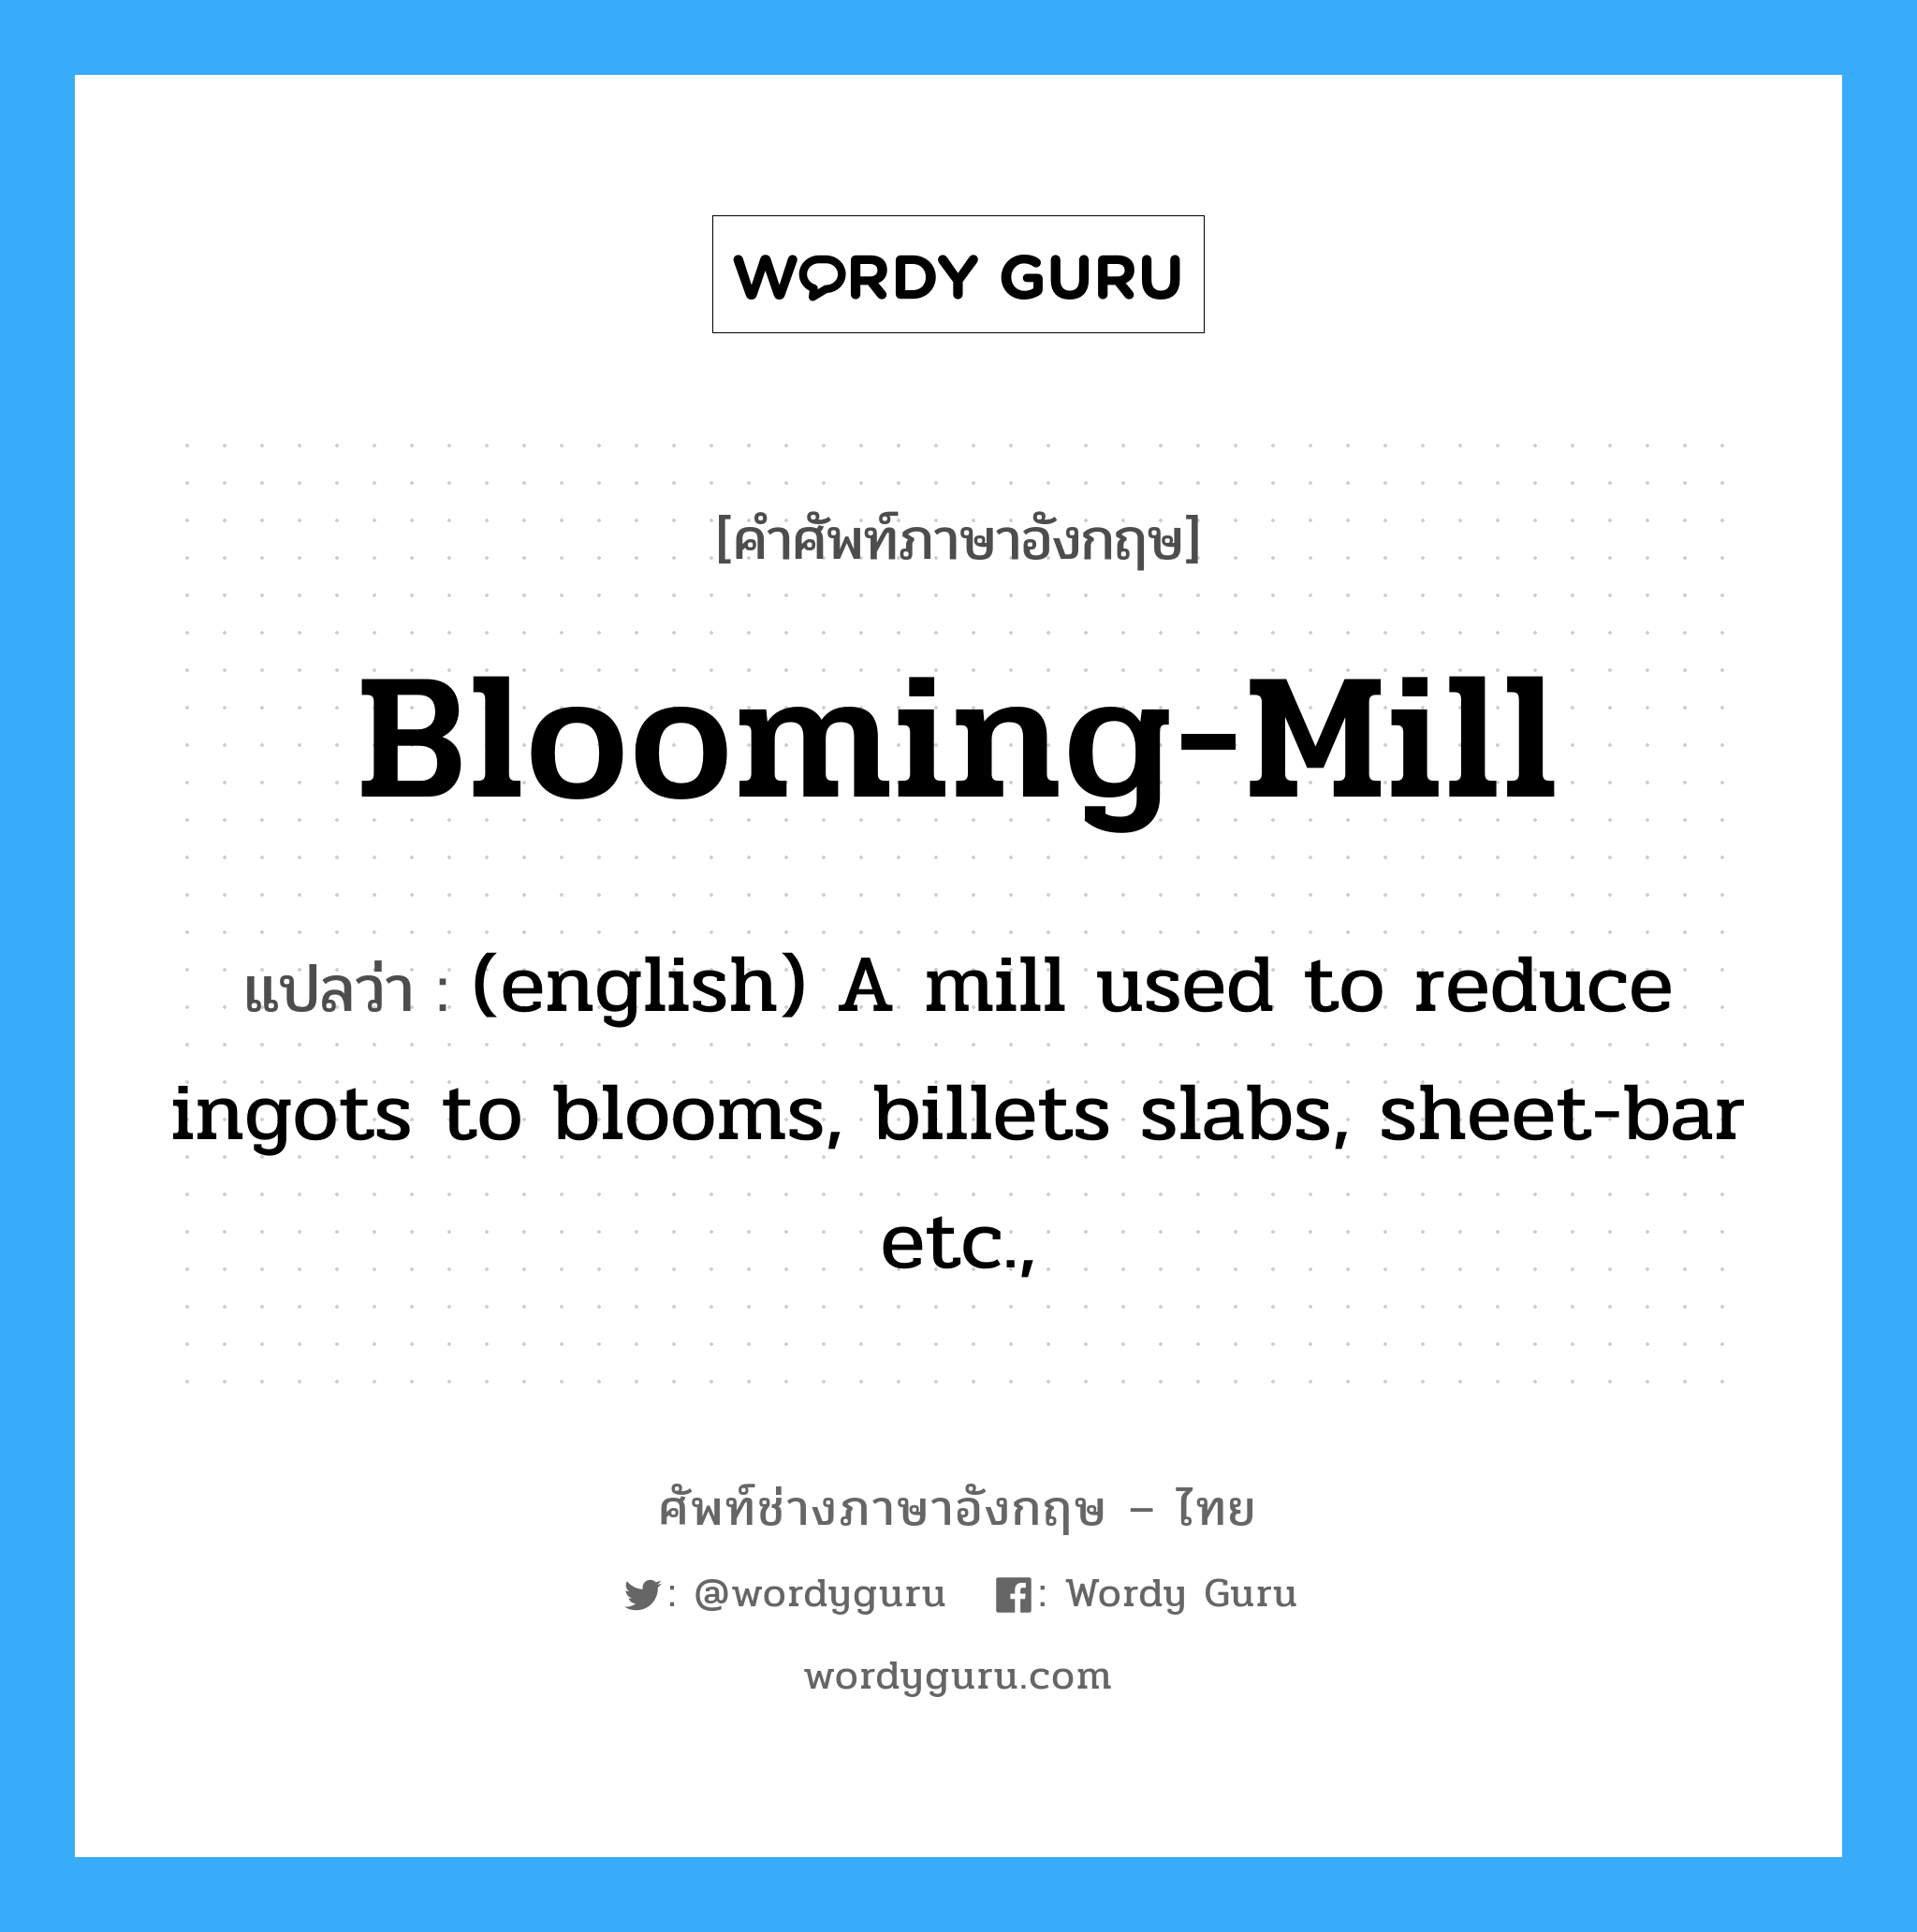 (english) A mill used to reduce ingots to blooms, billets slabs, sheet-bar etc., ภาษาอังกฤษ?, คำศัพท์ช่างภาษาอังกฤษ - ไทย (english) A mill used to reduce ingots to blooms, billets slabs, sheet-bar etc., คำศัพท์ภาษาอังกฤษ (english) A mill used to reduce ingots to blooms, billets slabs, sheet-bar etc., แปลว่า Blooming-Mill